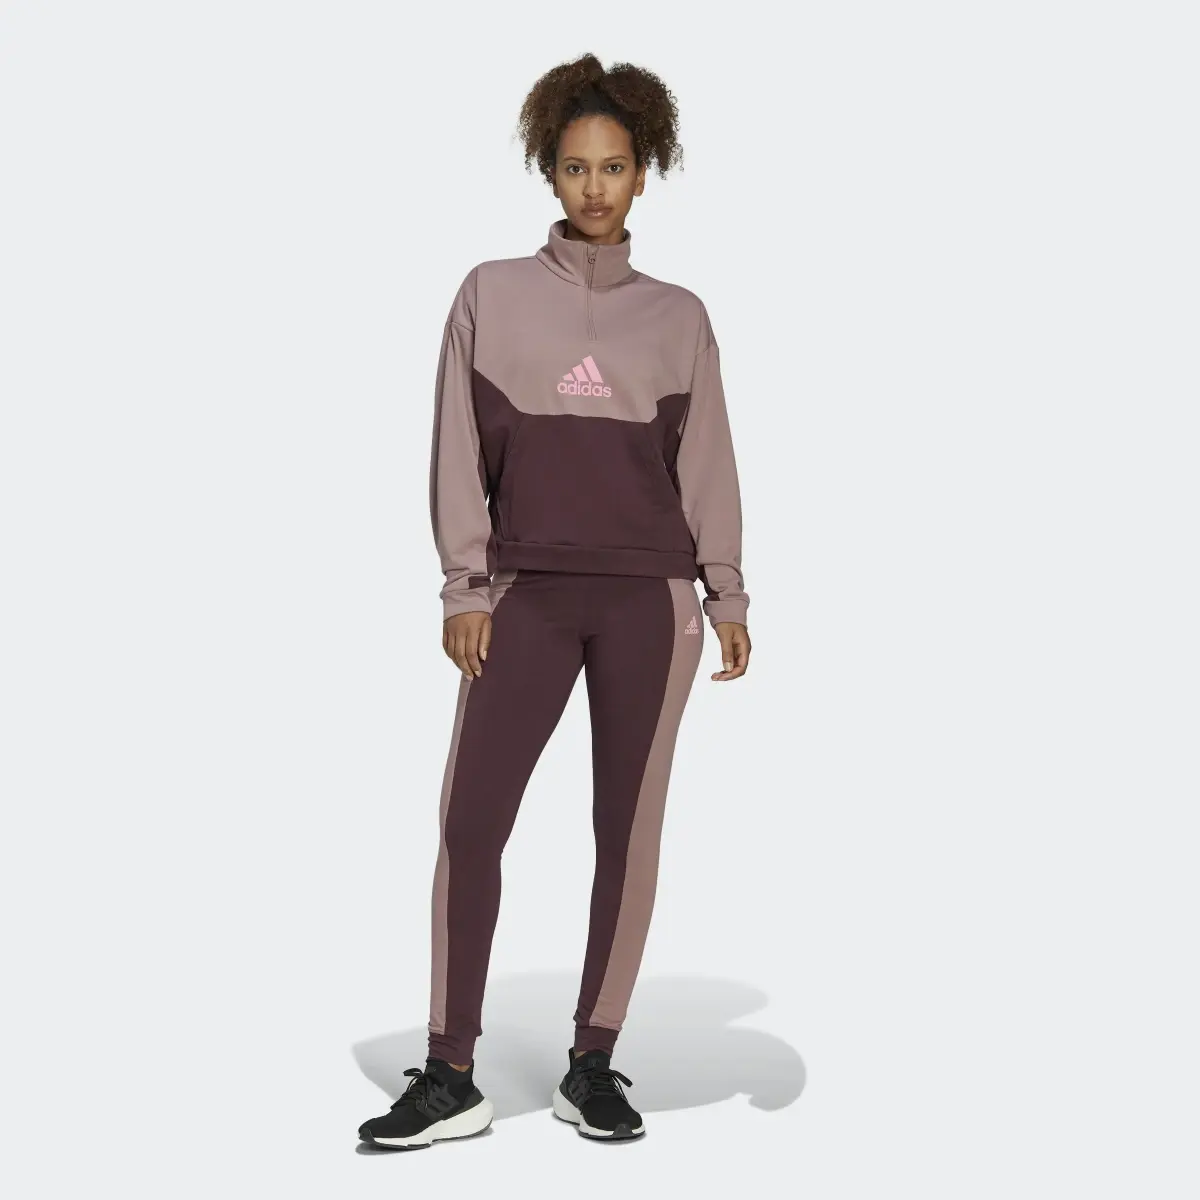 Adidas Half-Zip and Tights Track Suit. 2